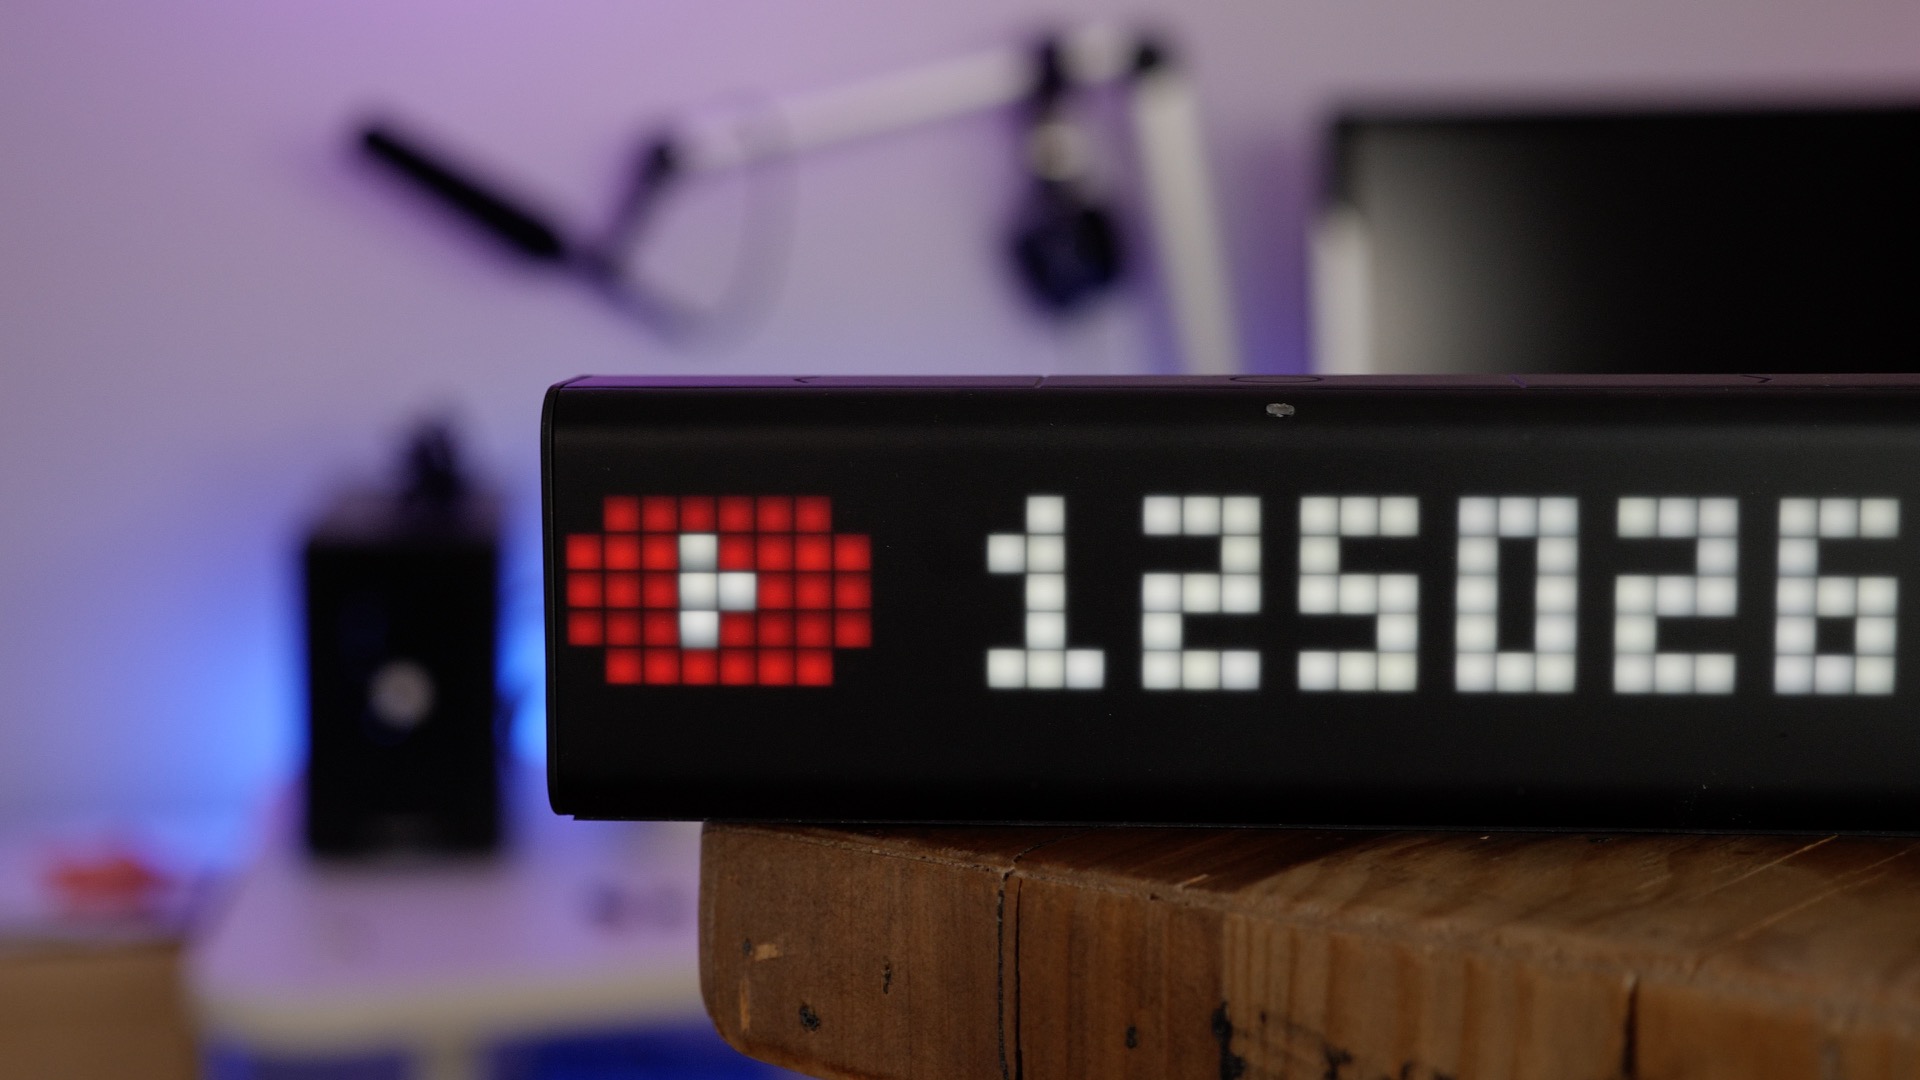 LaMetric Smart Home Wi-Fi Clock with Alexa support for $169 shipped (Reg.  $199)